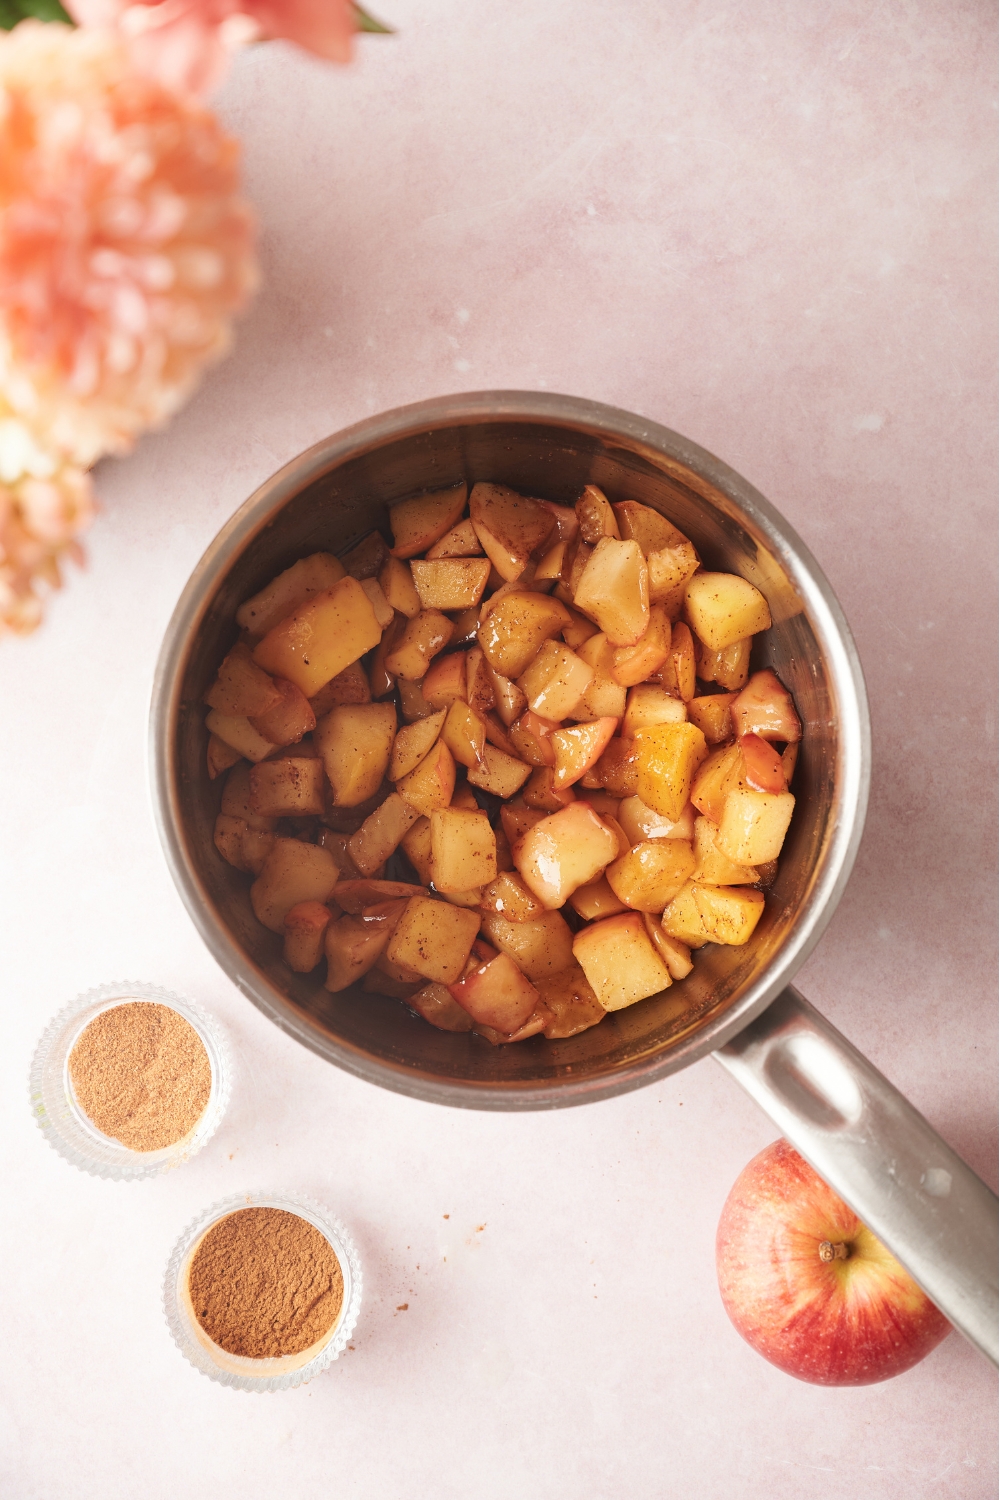 A pot with cooked apple compote.